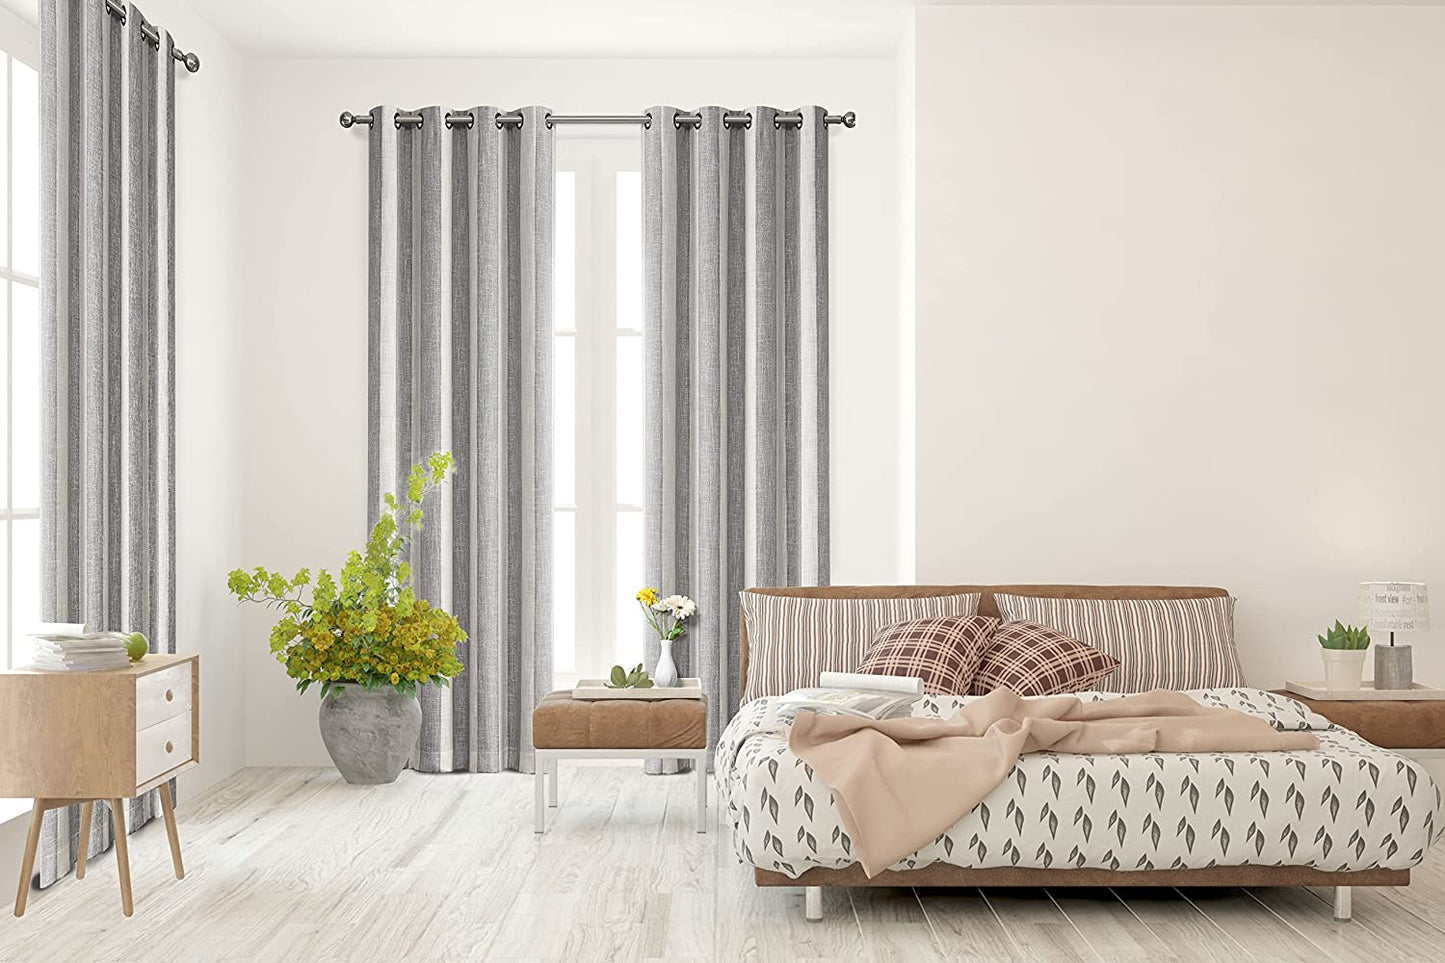 WEST LAKE Full Blackout Curtain Panel Grey Beige Vertical Stripe Window Treatment Grommets Thermal Insulated Noise Reducing 100 Blackout Drape for Living Room, Bedroom, 50"Wx84"L, 2 Panel, Gray/White  WEST LAKE   